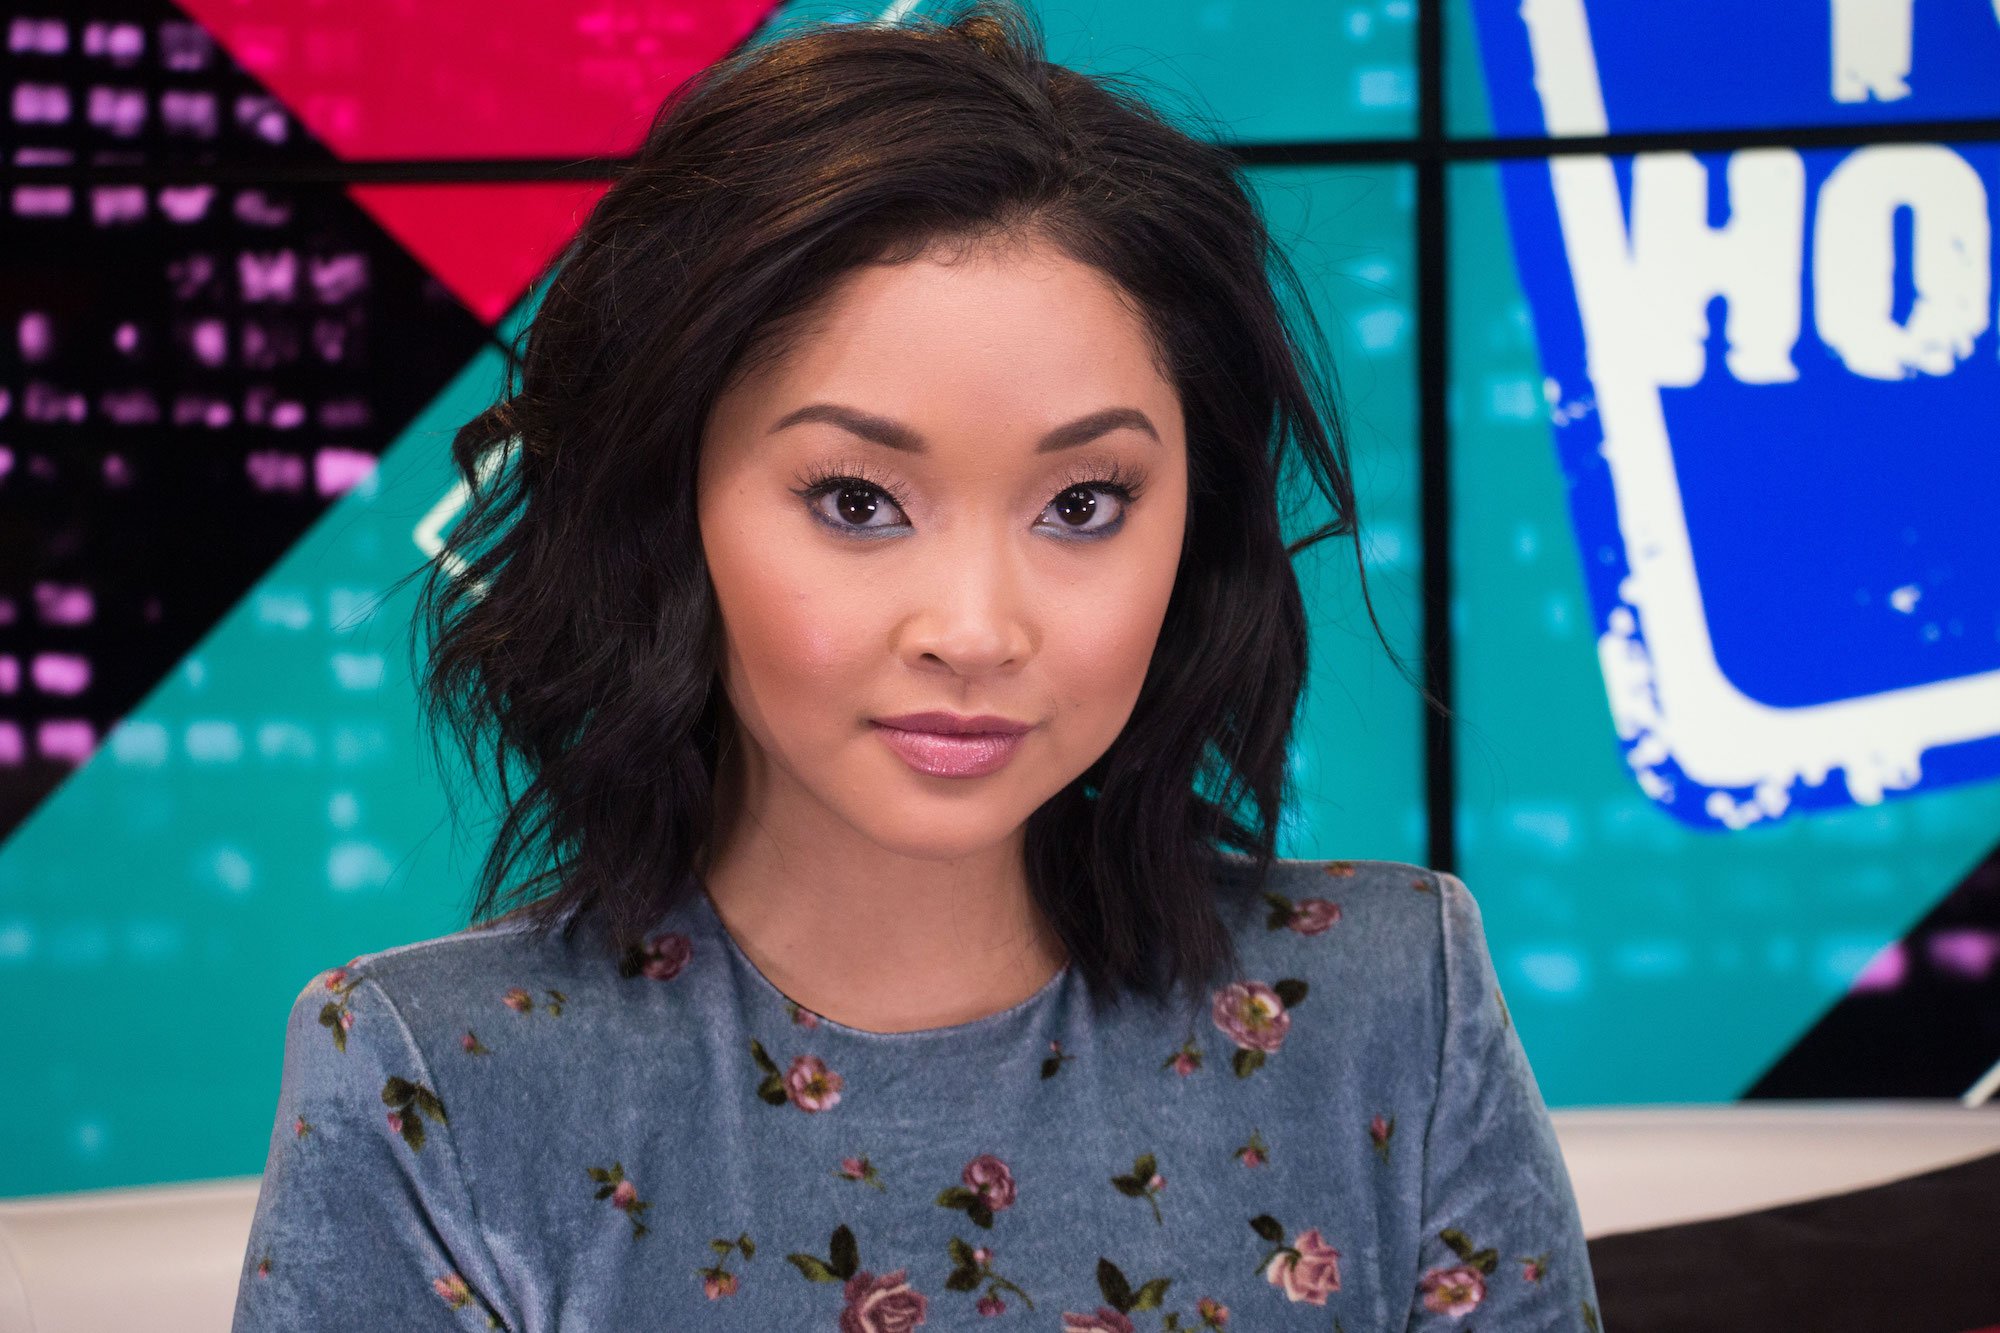 Lana Condor smiling at the camera, in front of a multicolor background